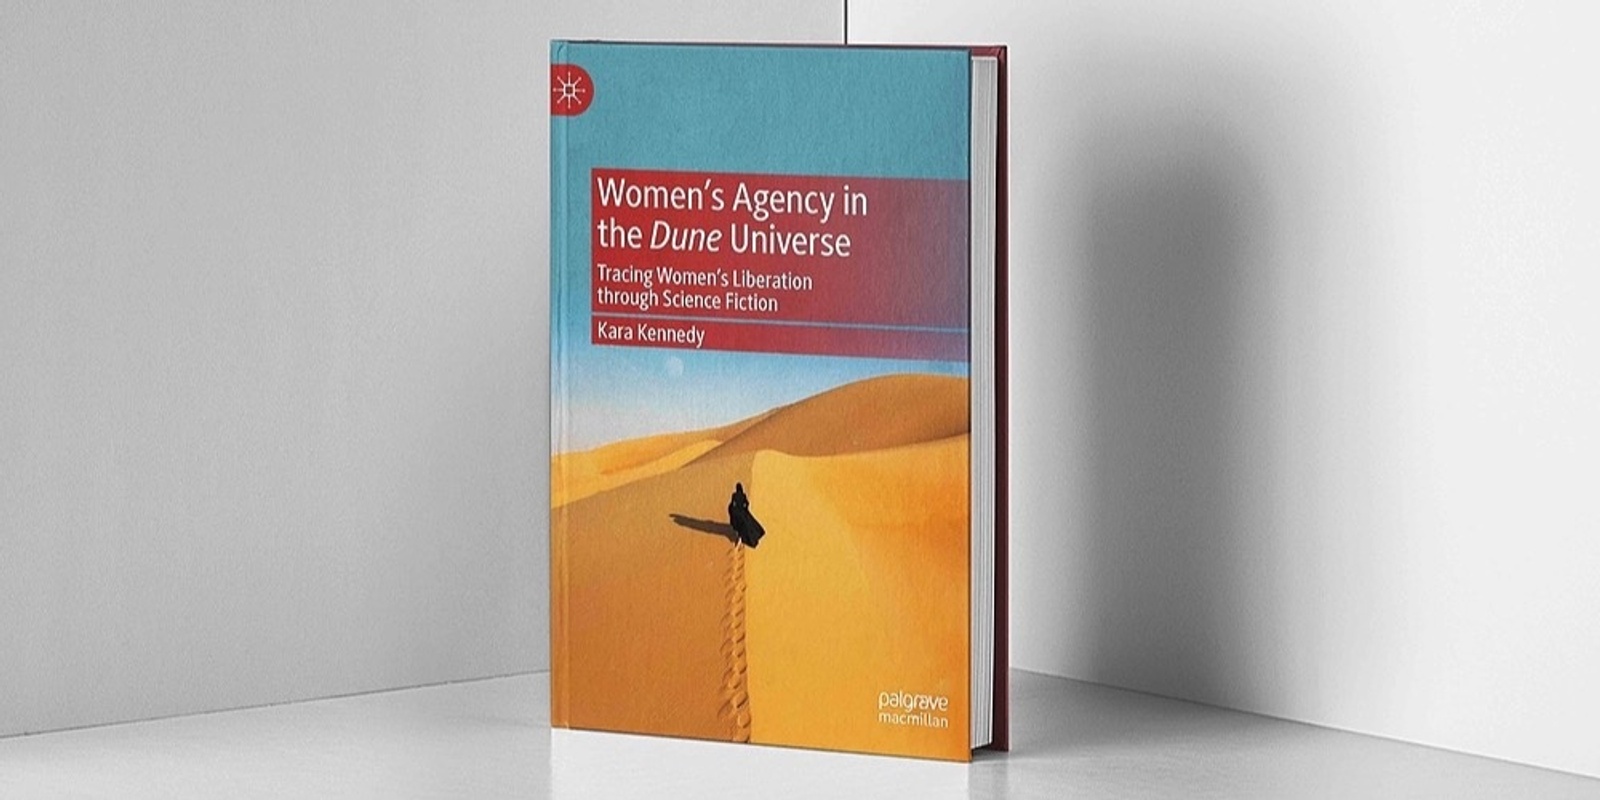 Banner image for Dune Scholar Book Launch: Women’s Agency in the Dune Universe